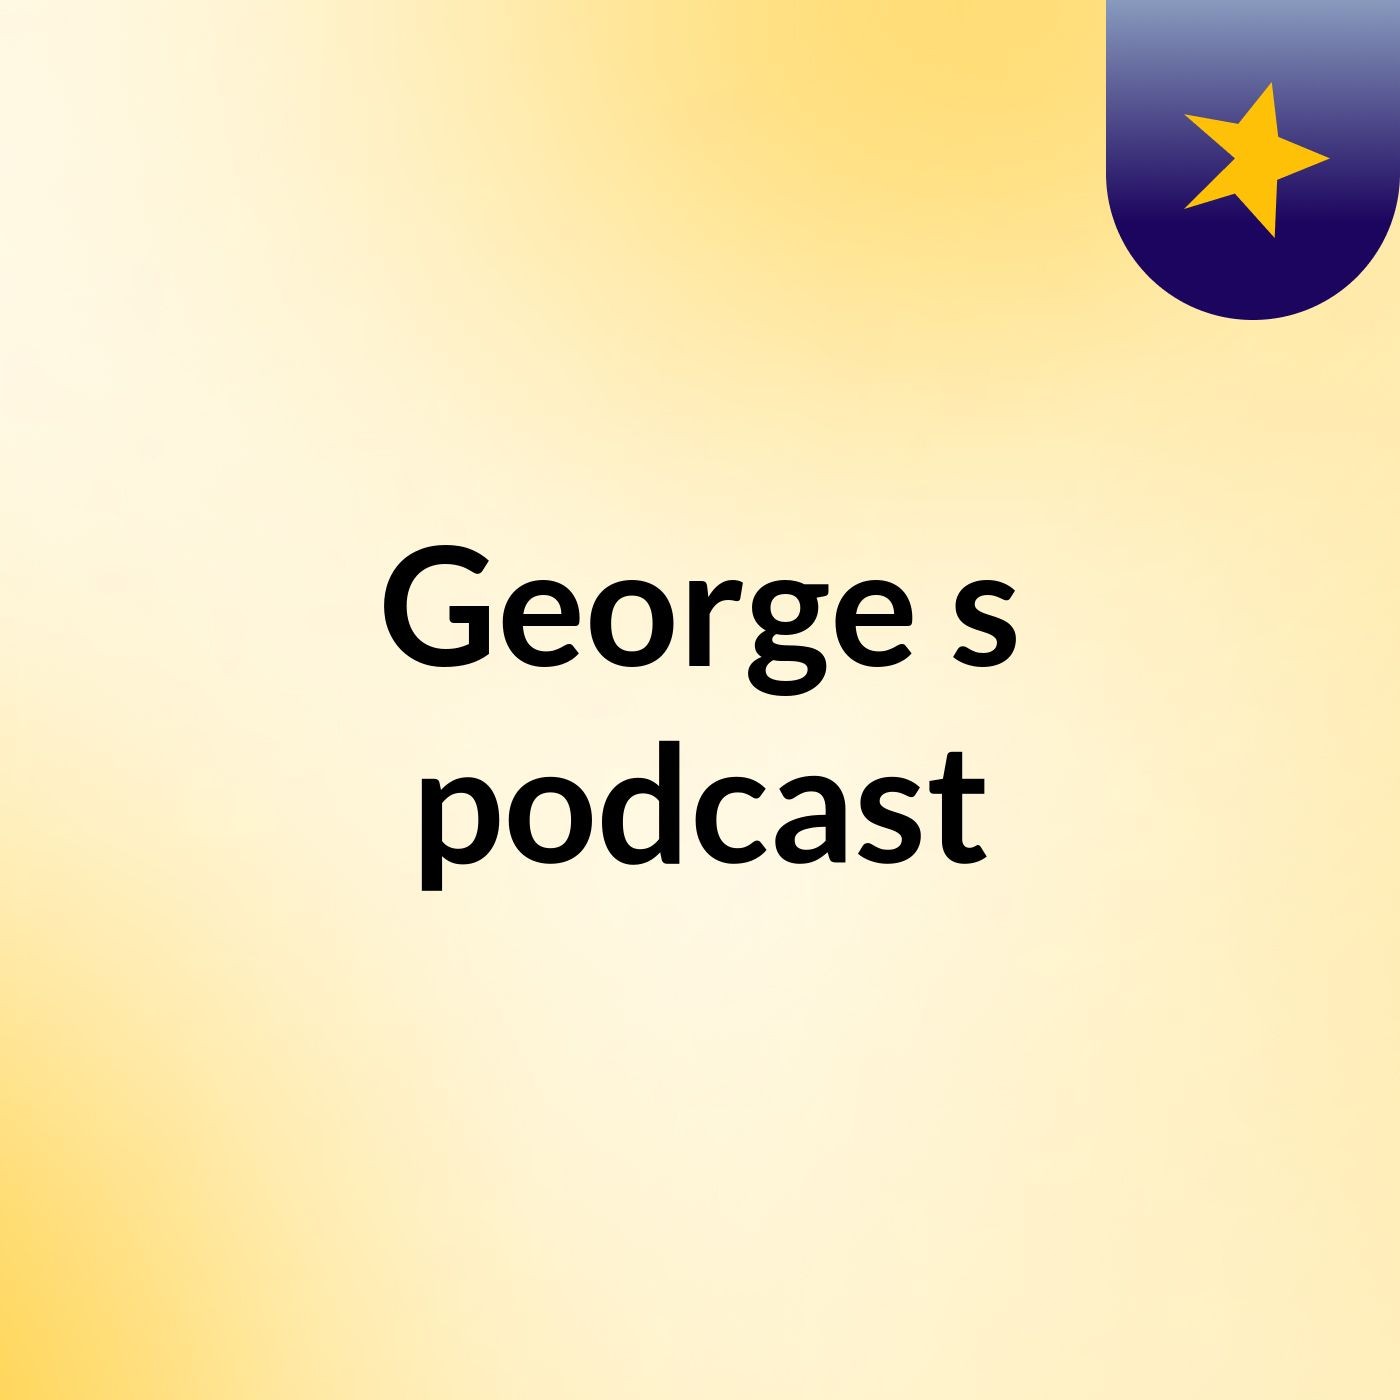 Episode 3 - George's podcast